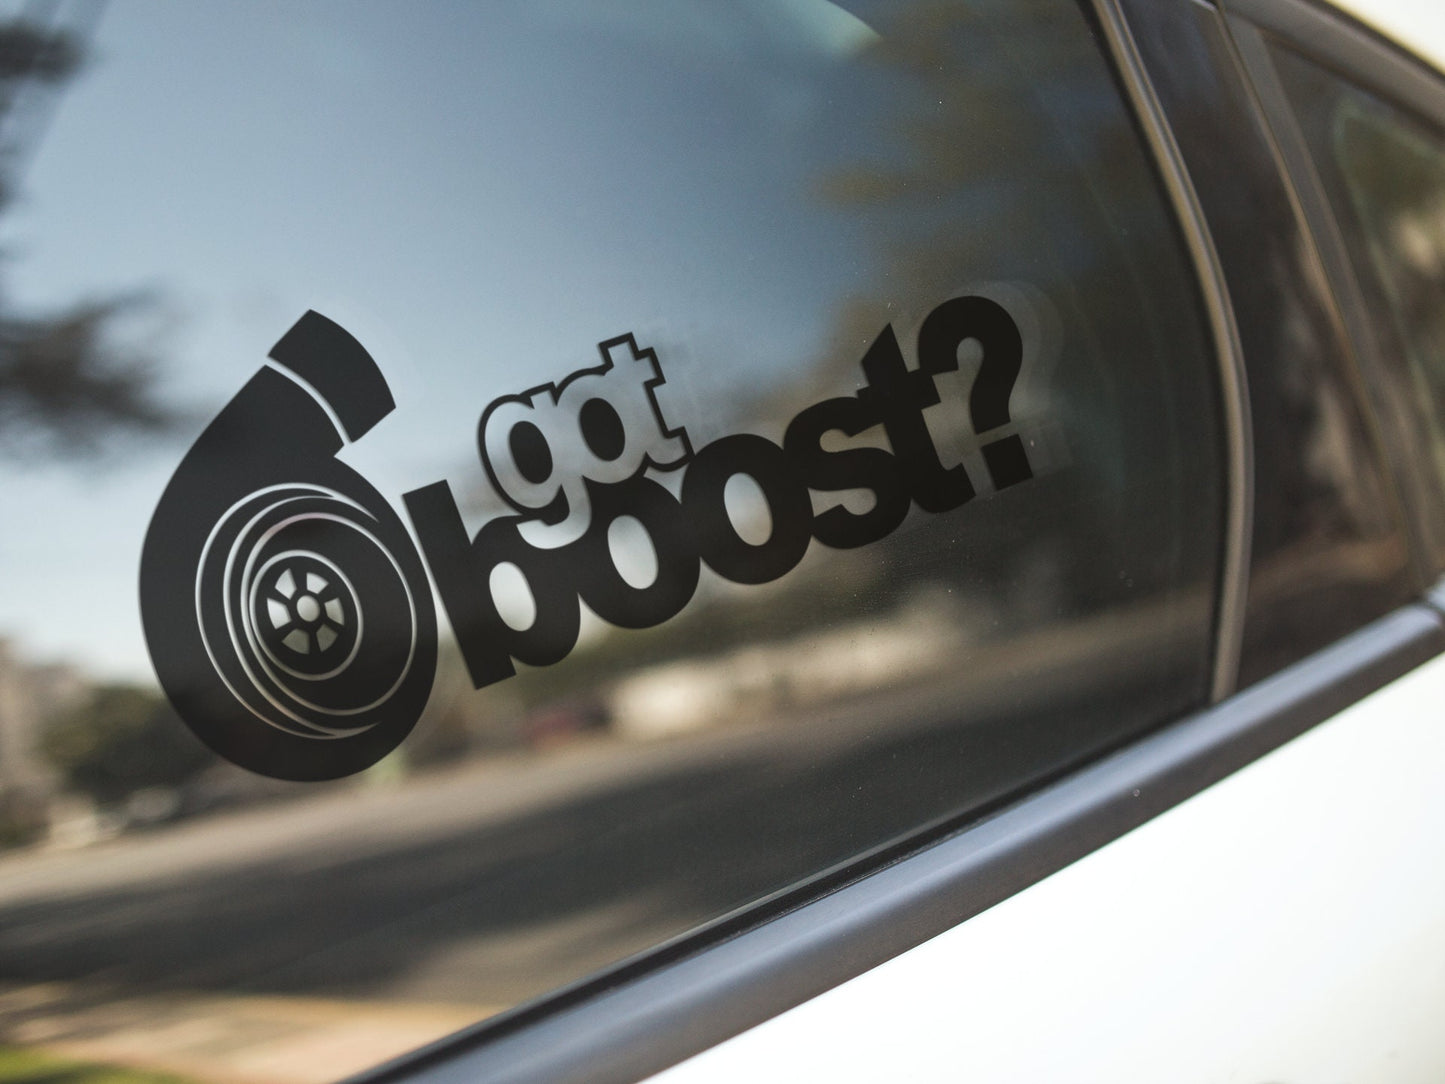 Got Boost? Decal - Many Colors & Sizes